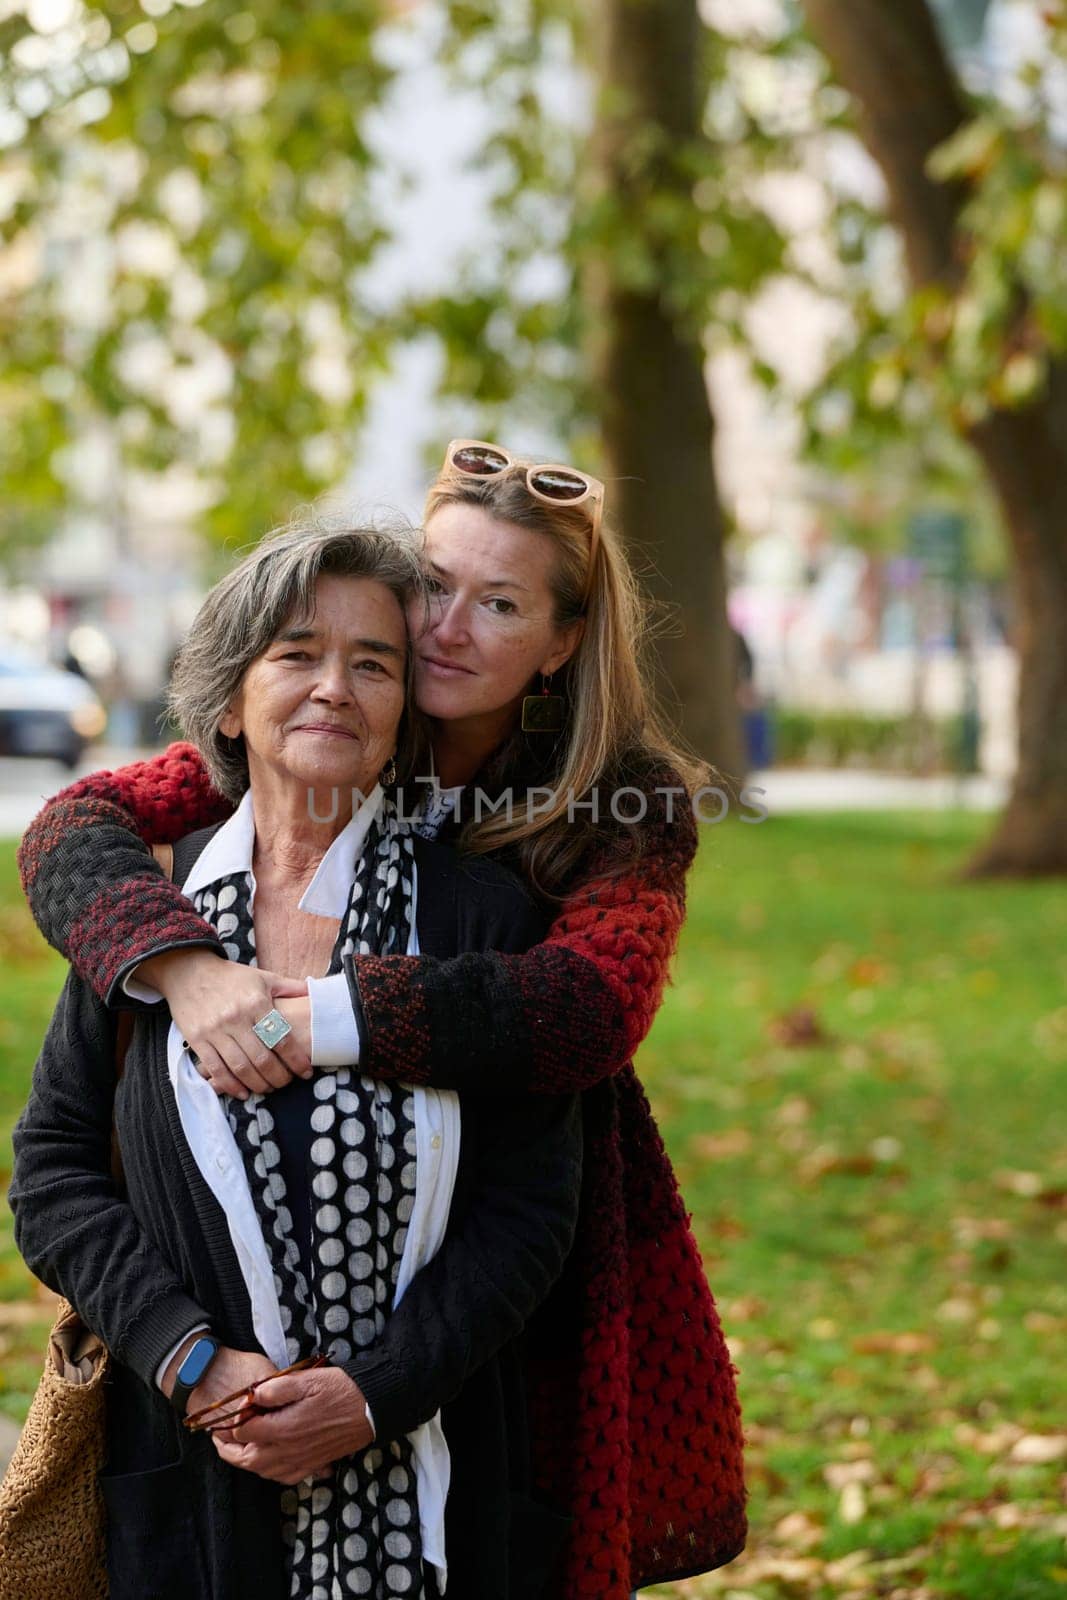 Elderly old cute woman with Alzheimer's very happy and smiling when eldest daughter hugs and takes care of her in park in autumn. Theme aging and parenting, family relationships and social care.